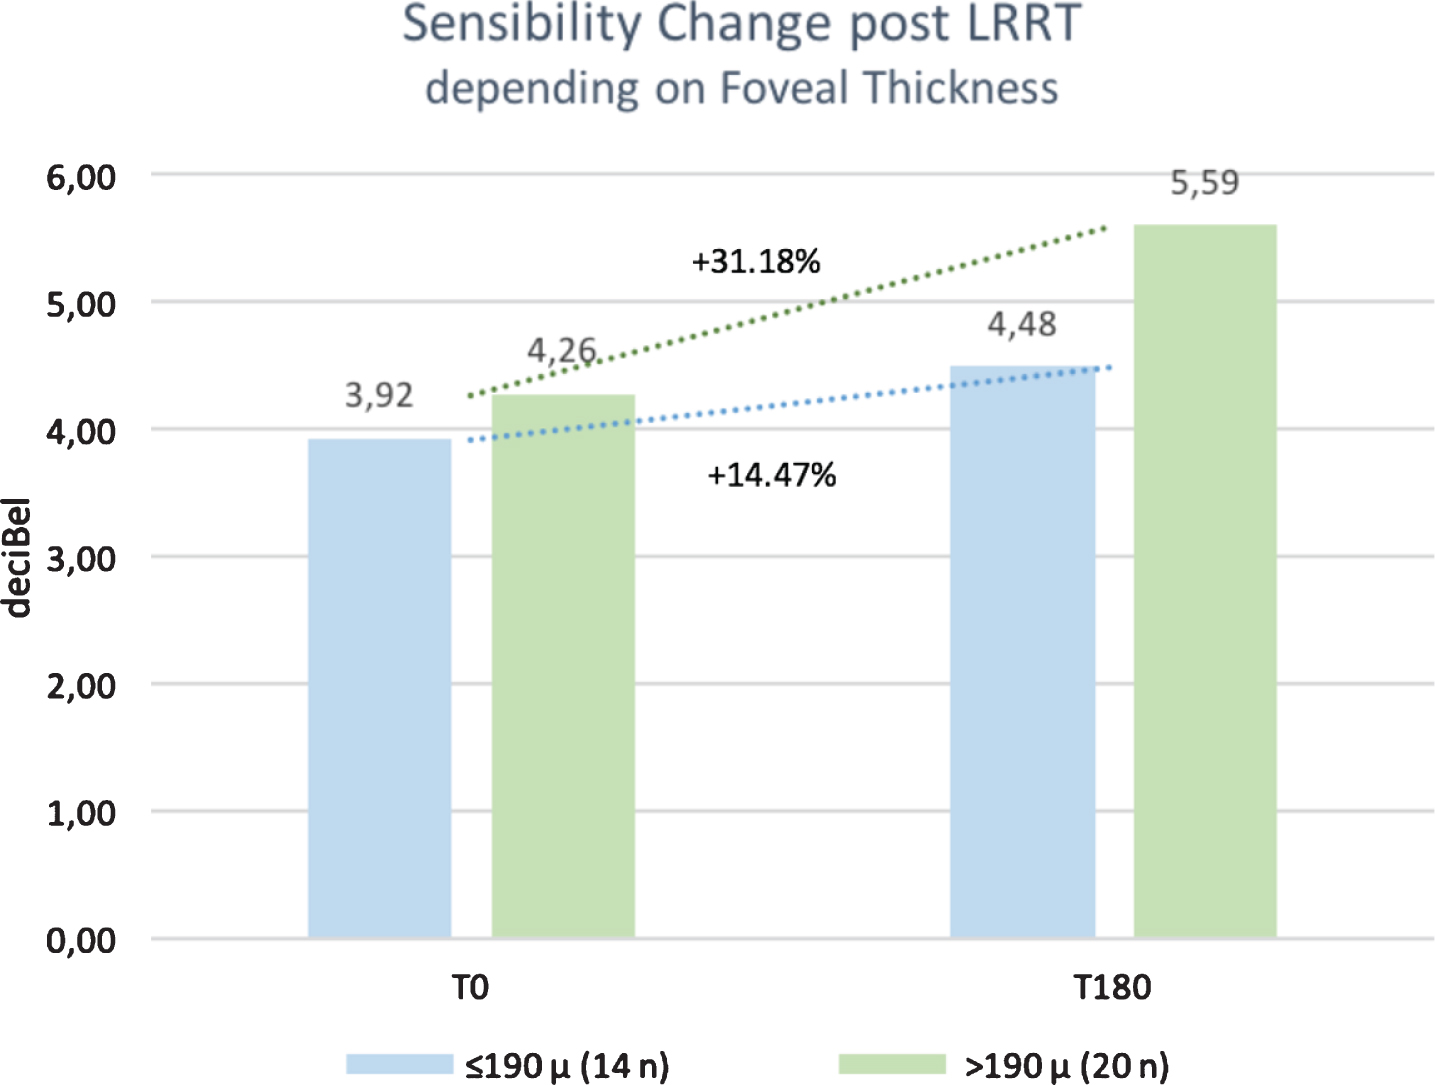 After stem cell surgery, Limoli Retinal Restoration Technique (LRRT), at 6 months (T180) there was a more relevant change for sensitivity in the group with foveal thickness >190μm (Group B), recorded with microperimetry.